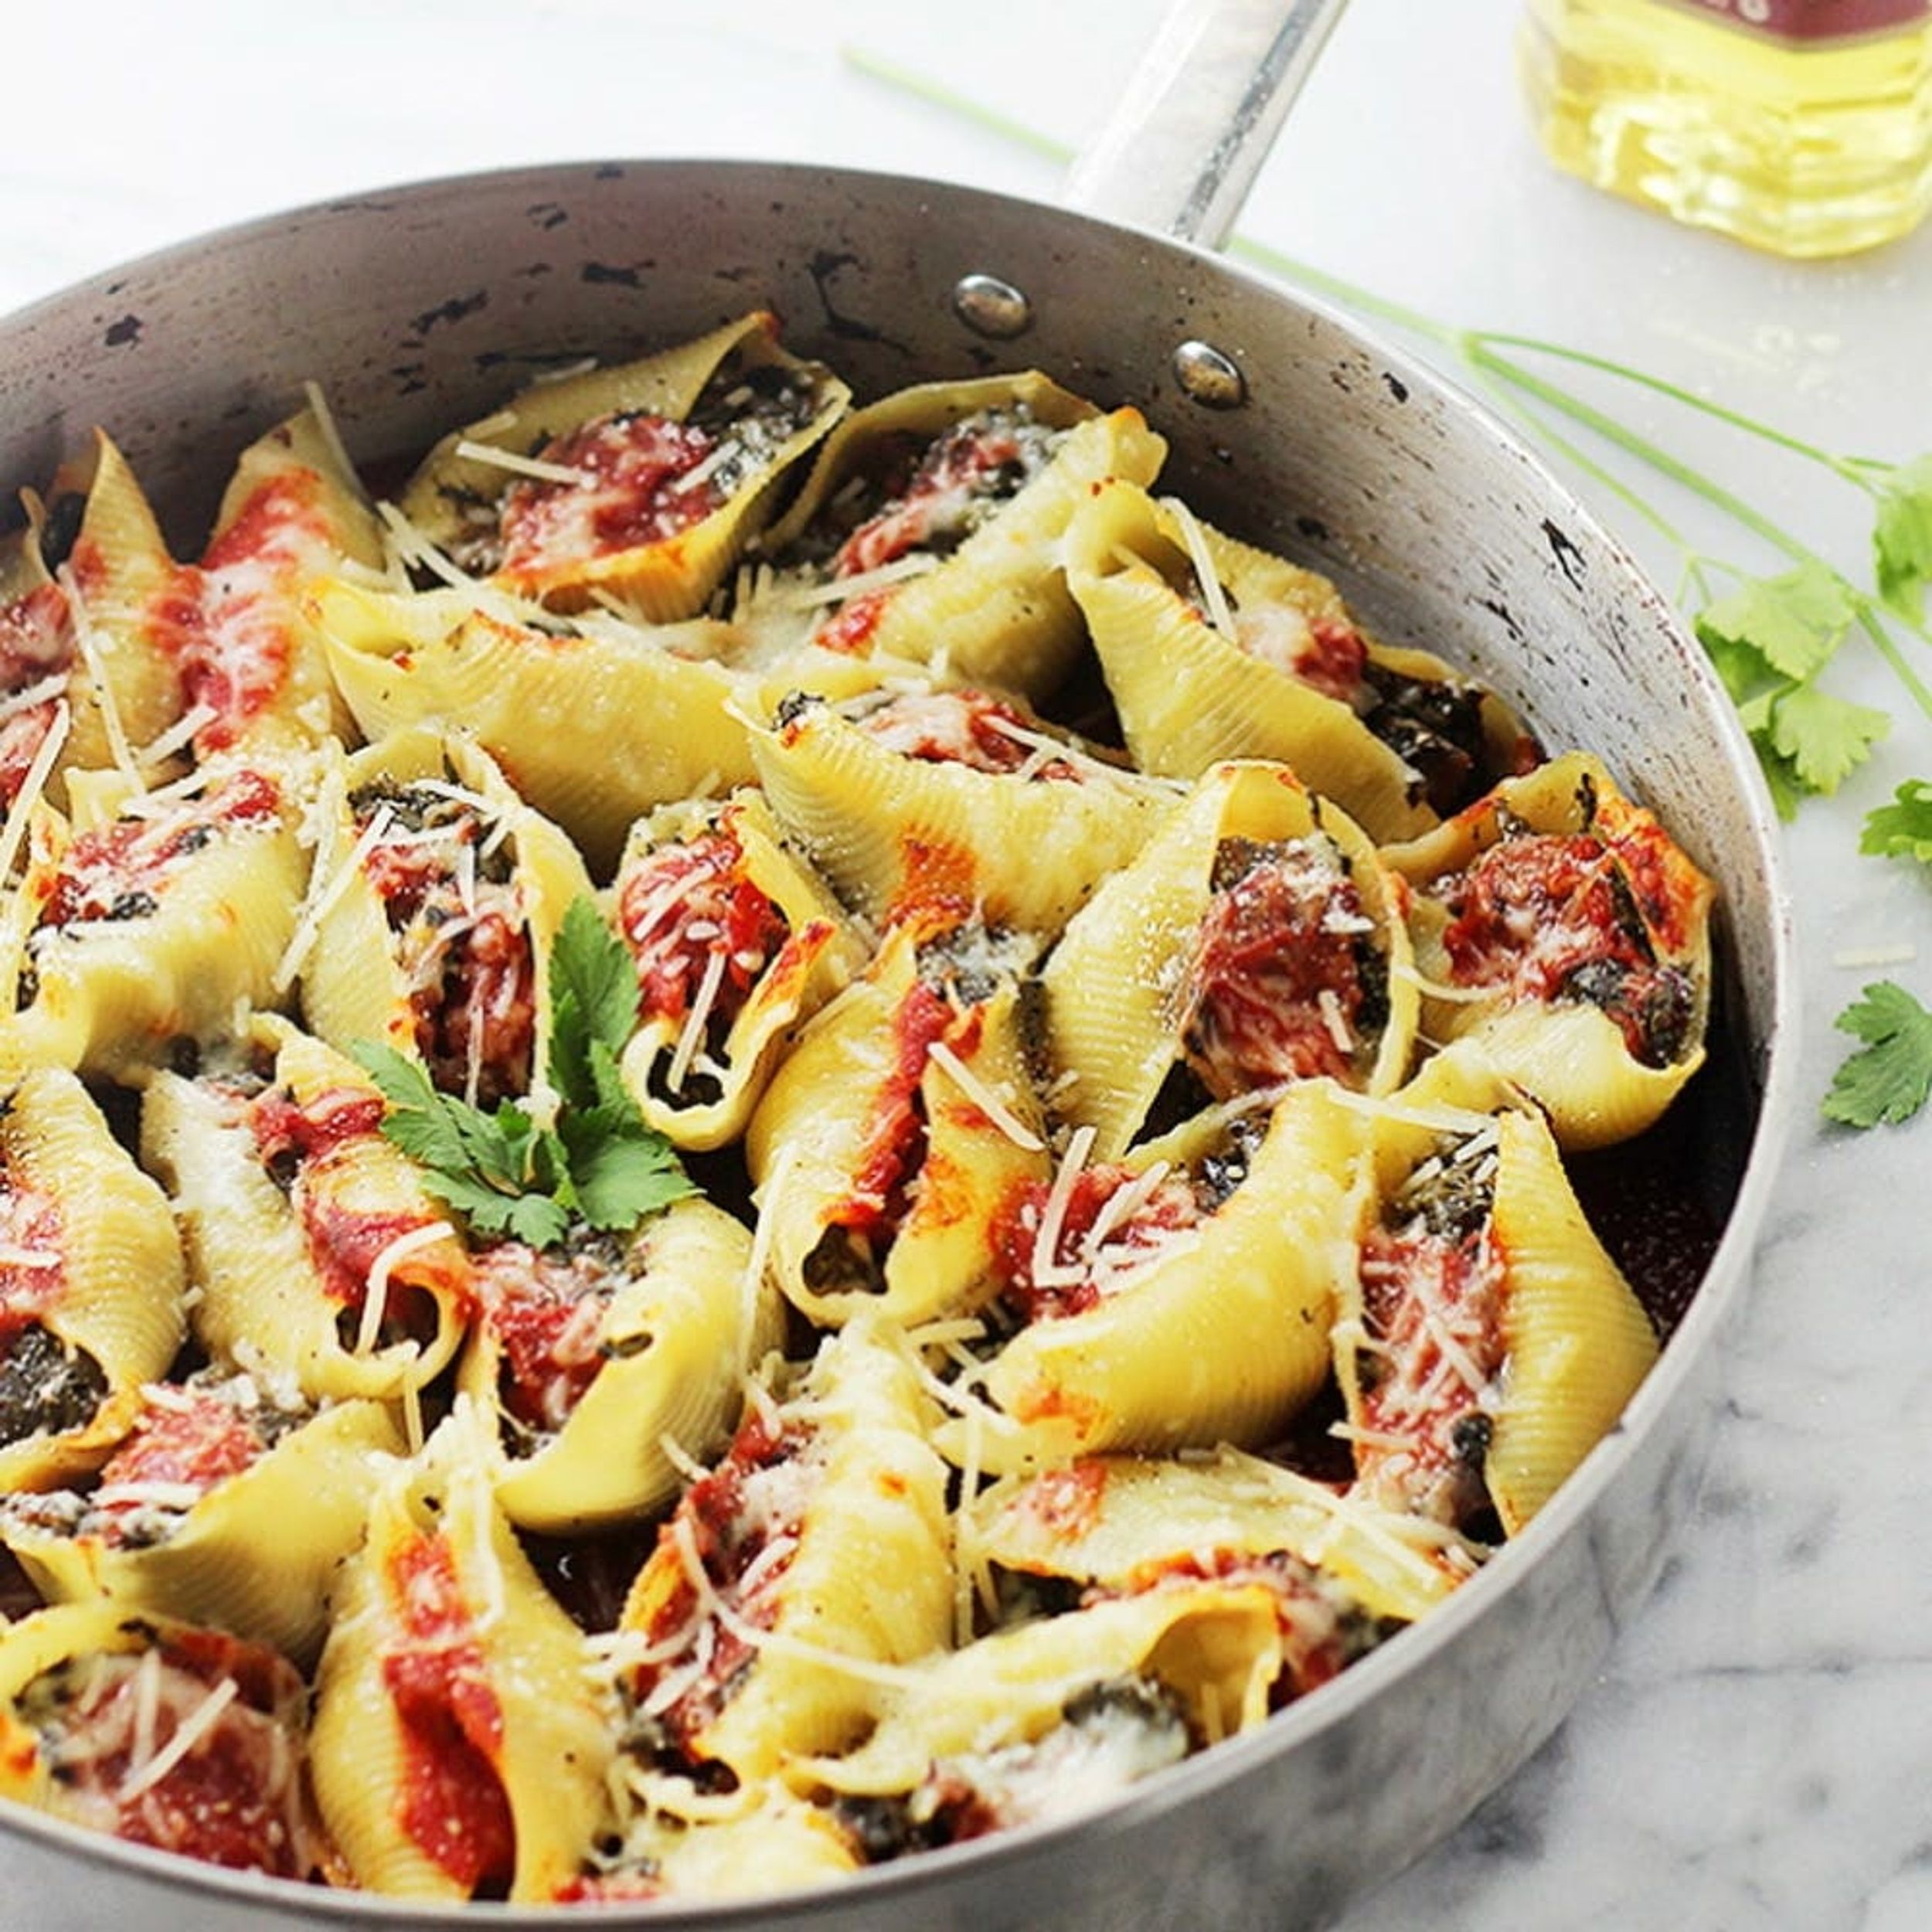 18 Stuffed Pasta Recipes to Make for Dinner This Week